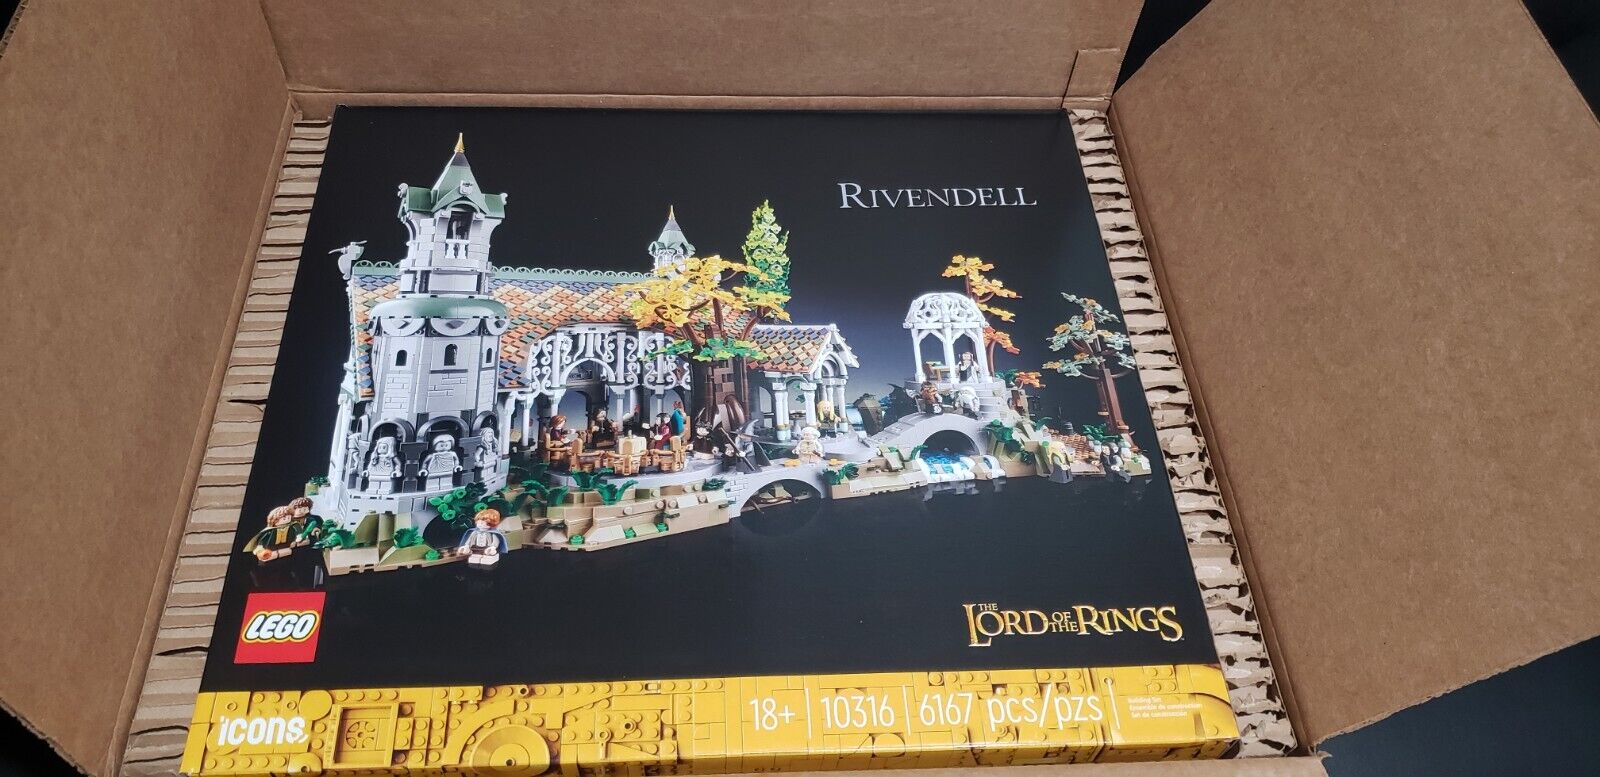 BRAND NEW LEGO Icons:The Lord of the Rings Rivendell Set (10316) IN ORIGINAL BOX